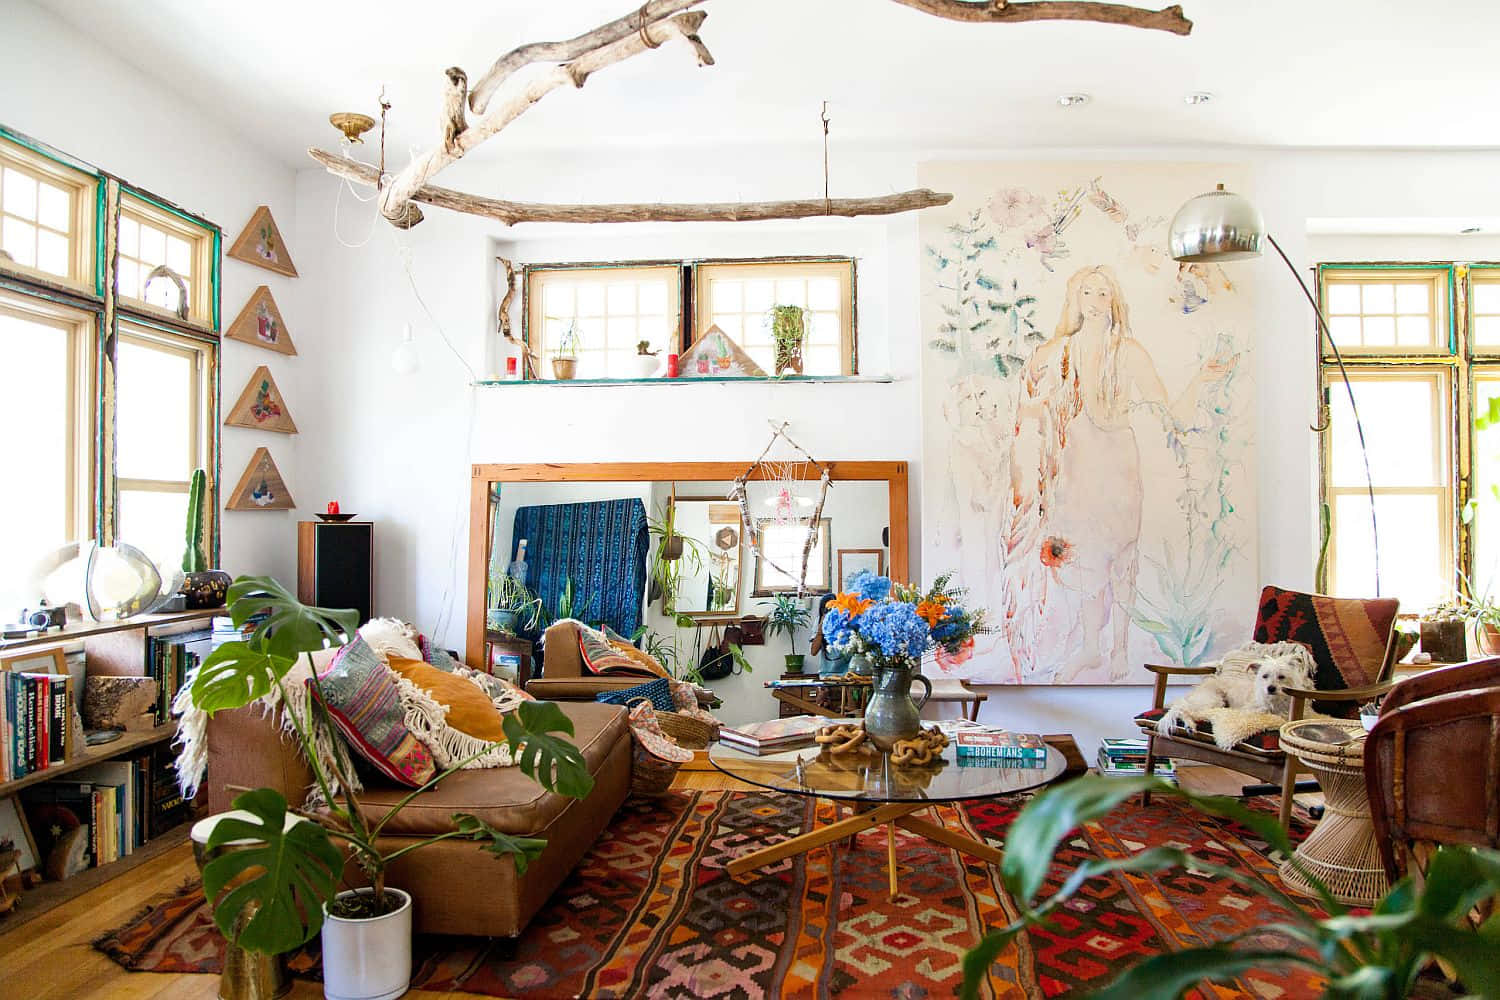 Achieve your boho chic aesthetic with this vibrant photo mural.